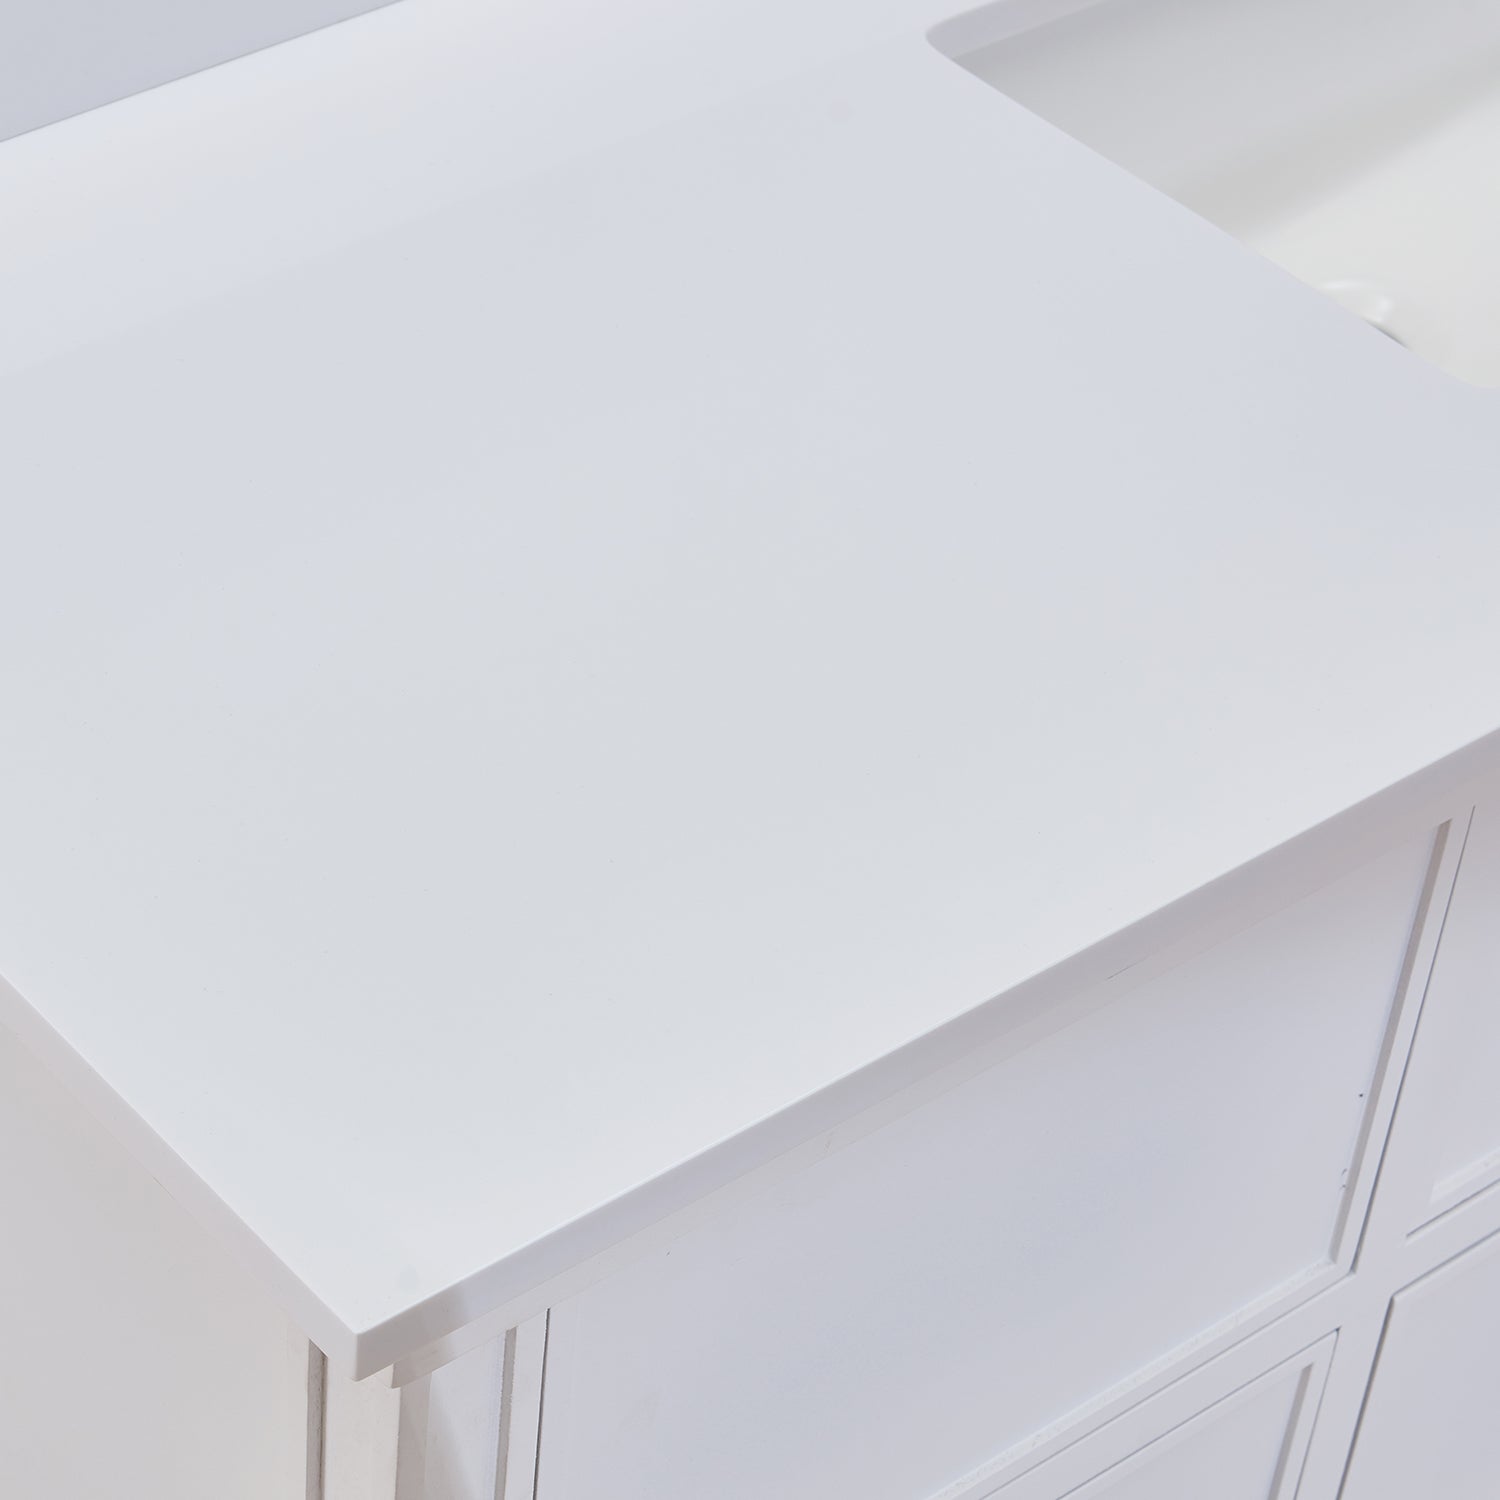 61 in. Composite Stone Vanity Top with White Sink